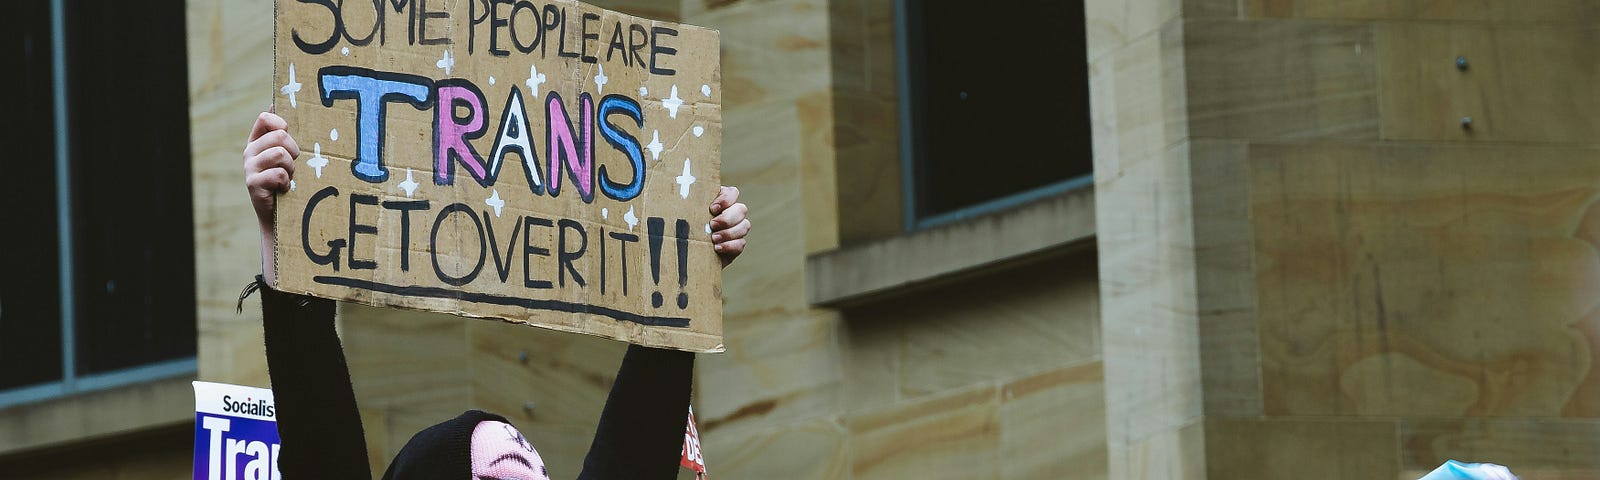 A protestor holding a sign that says some people are trans, get over it